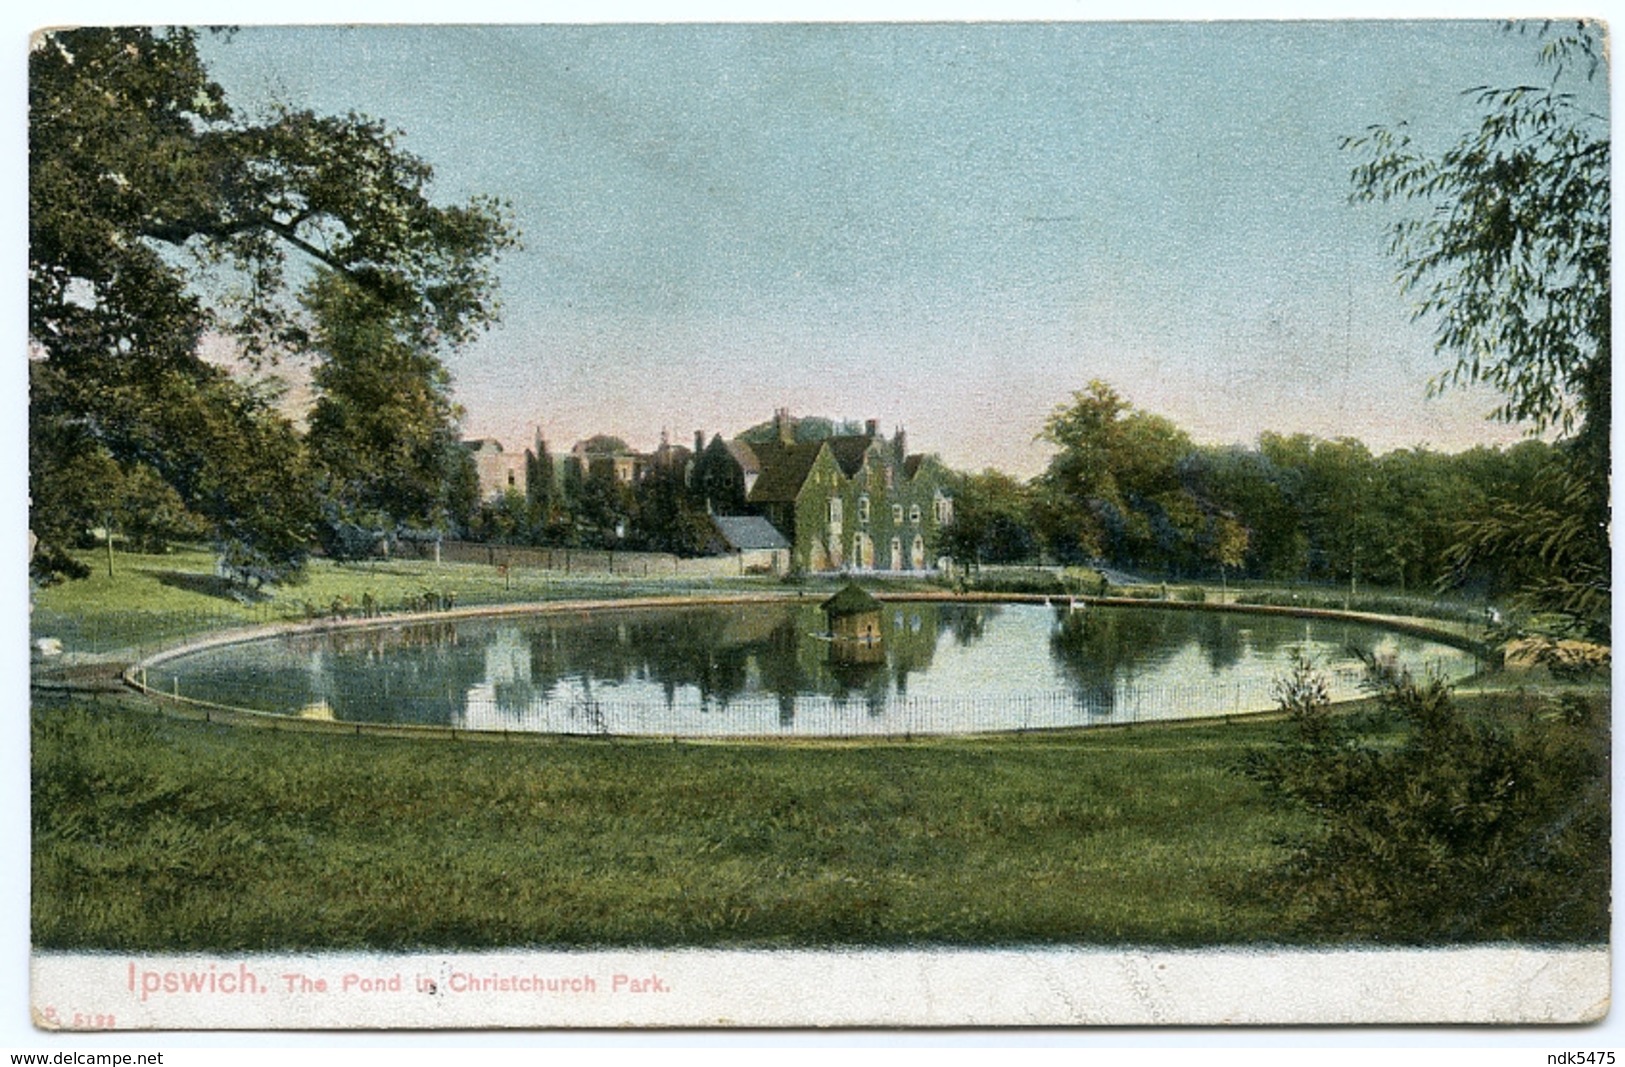 IPSWICH : THE POND IN CHRISTCHURCH PARK / ADDRESS - LONDON, ST JOHNS WOOD, CIRCUS PLACE, THE BEECHES (SHERWIN) - Ipswich